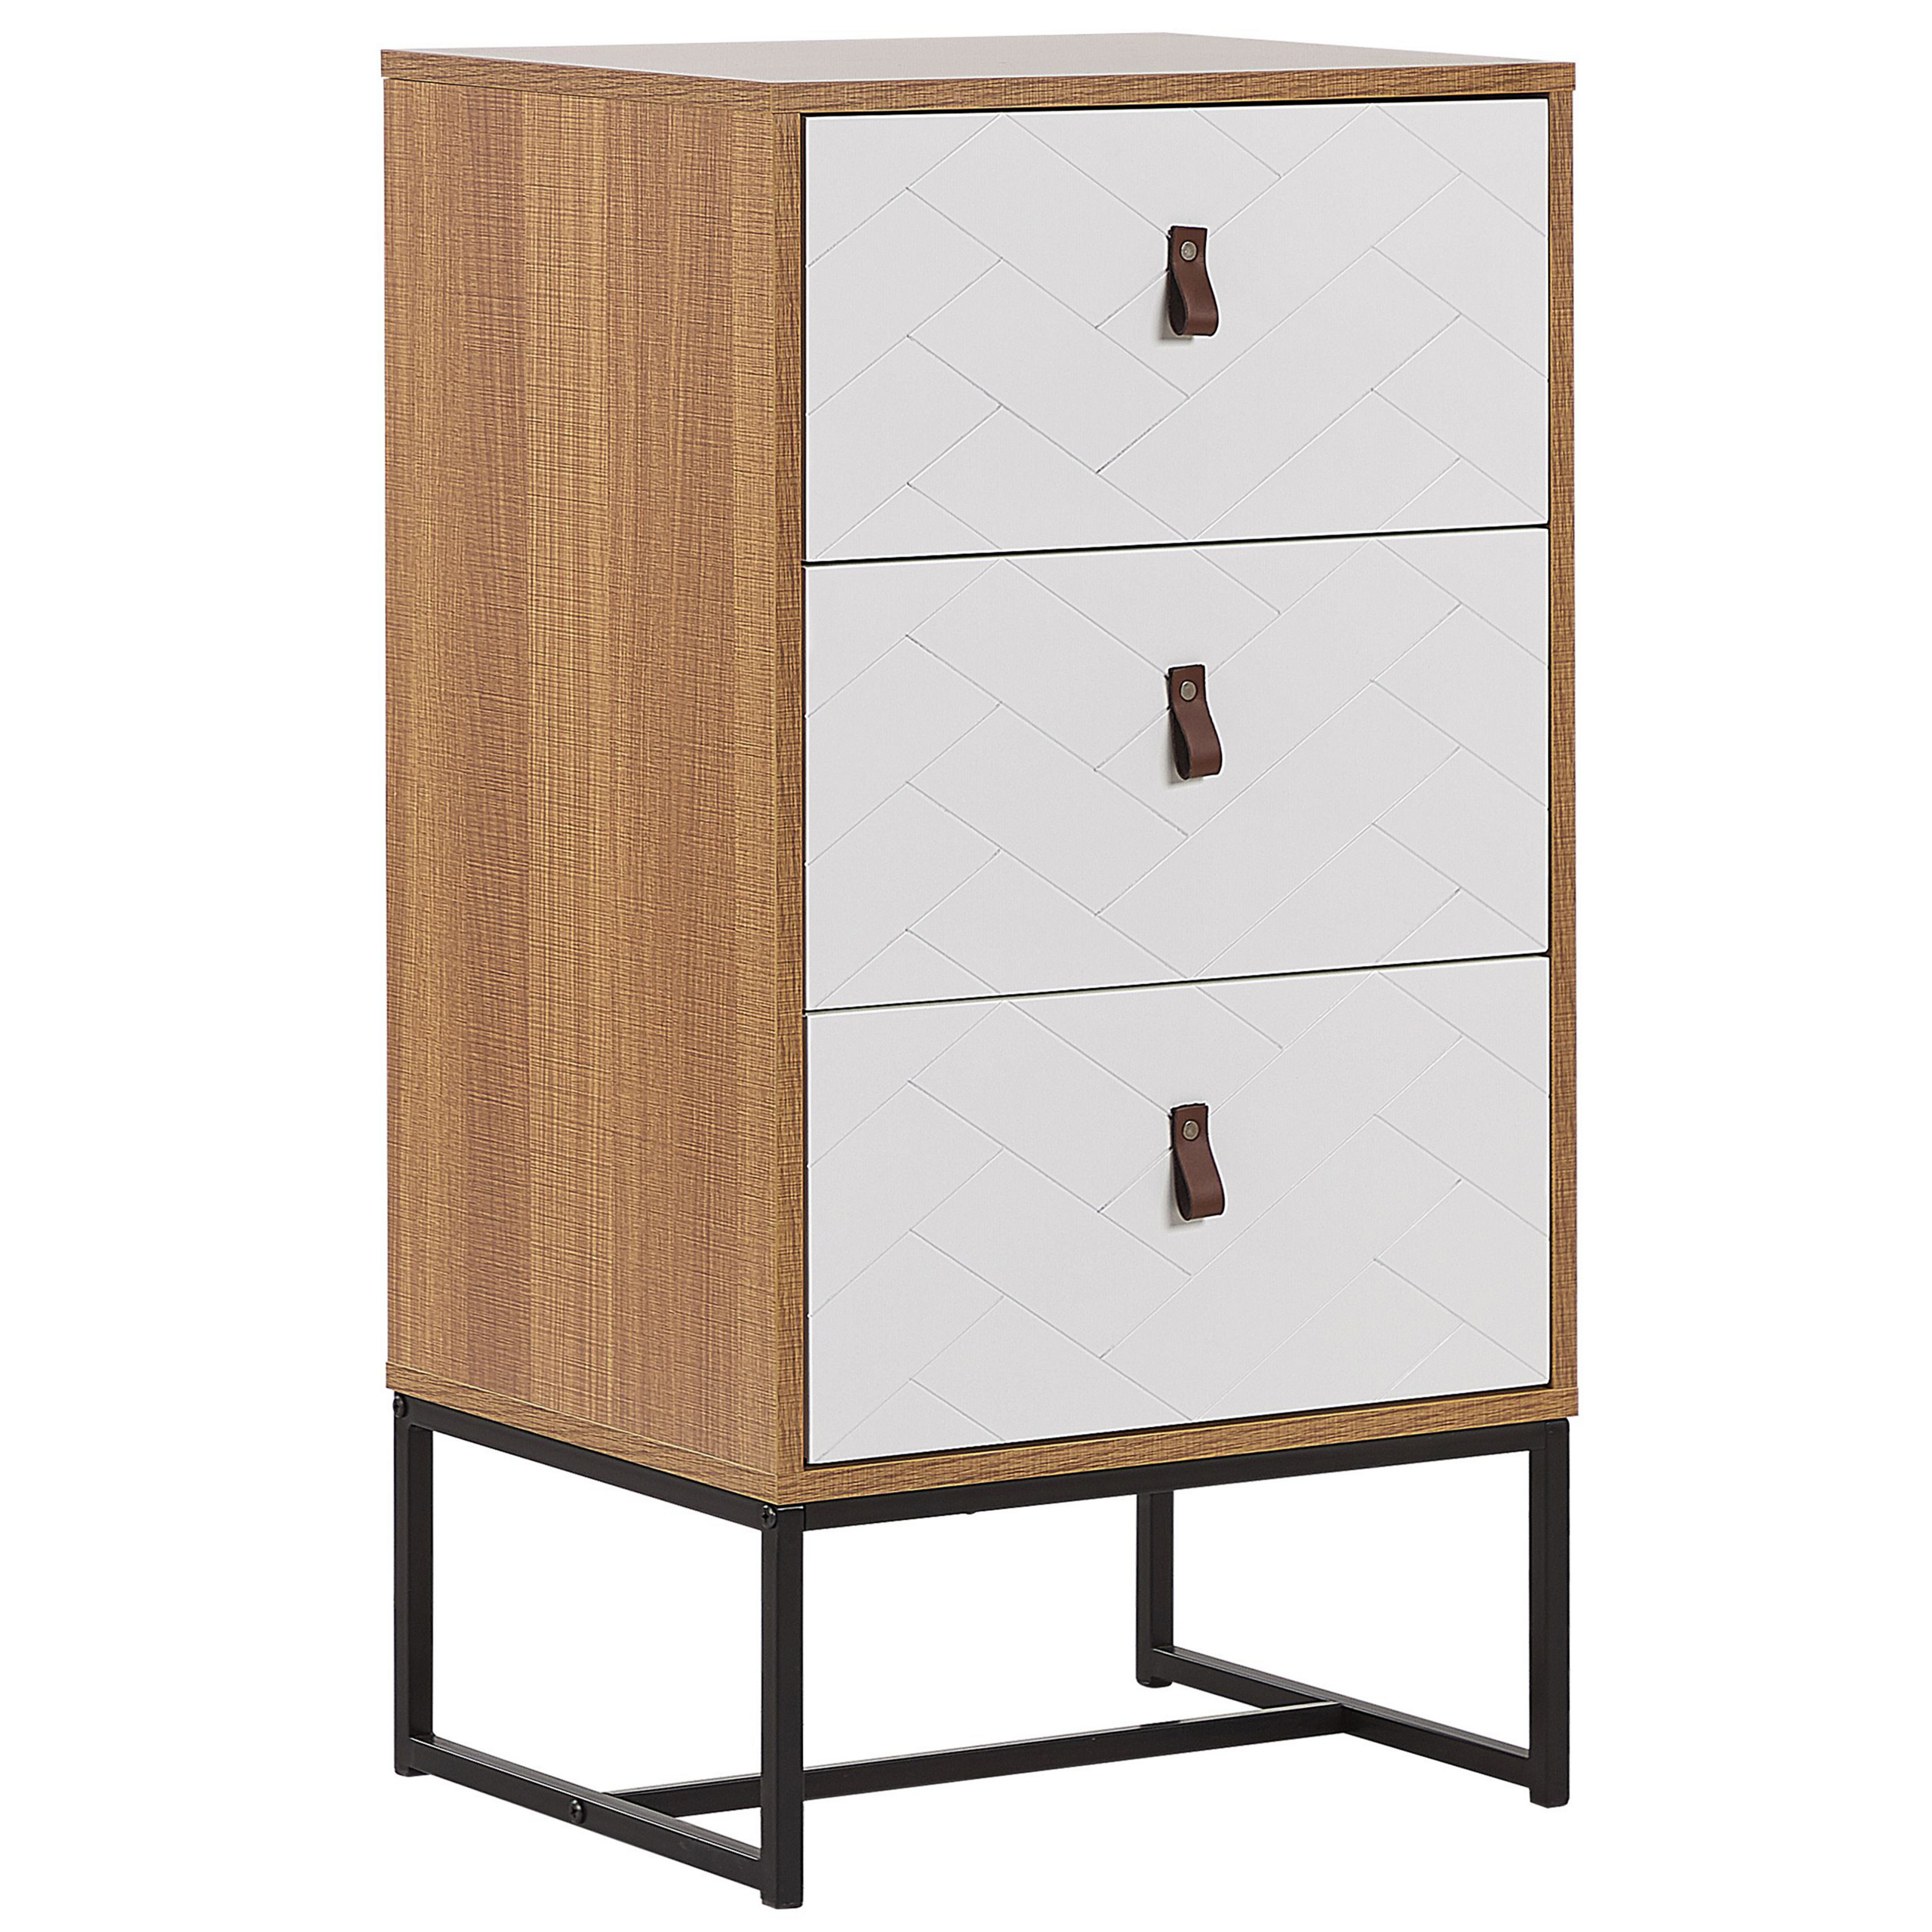 Beliani Chest of Drawers Light Wood with White Metal Legs Storage Cabinet Dresser 91 x 49 cm Modern Traditional Living Room Furniture